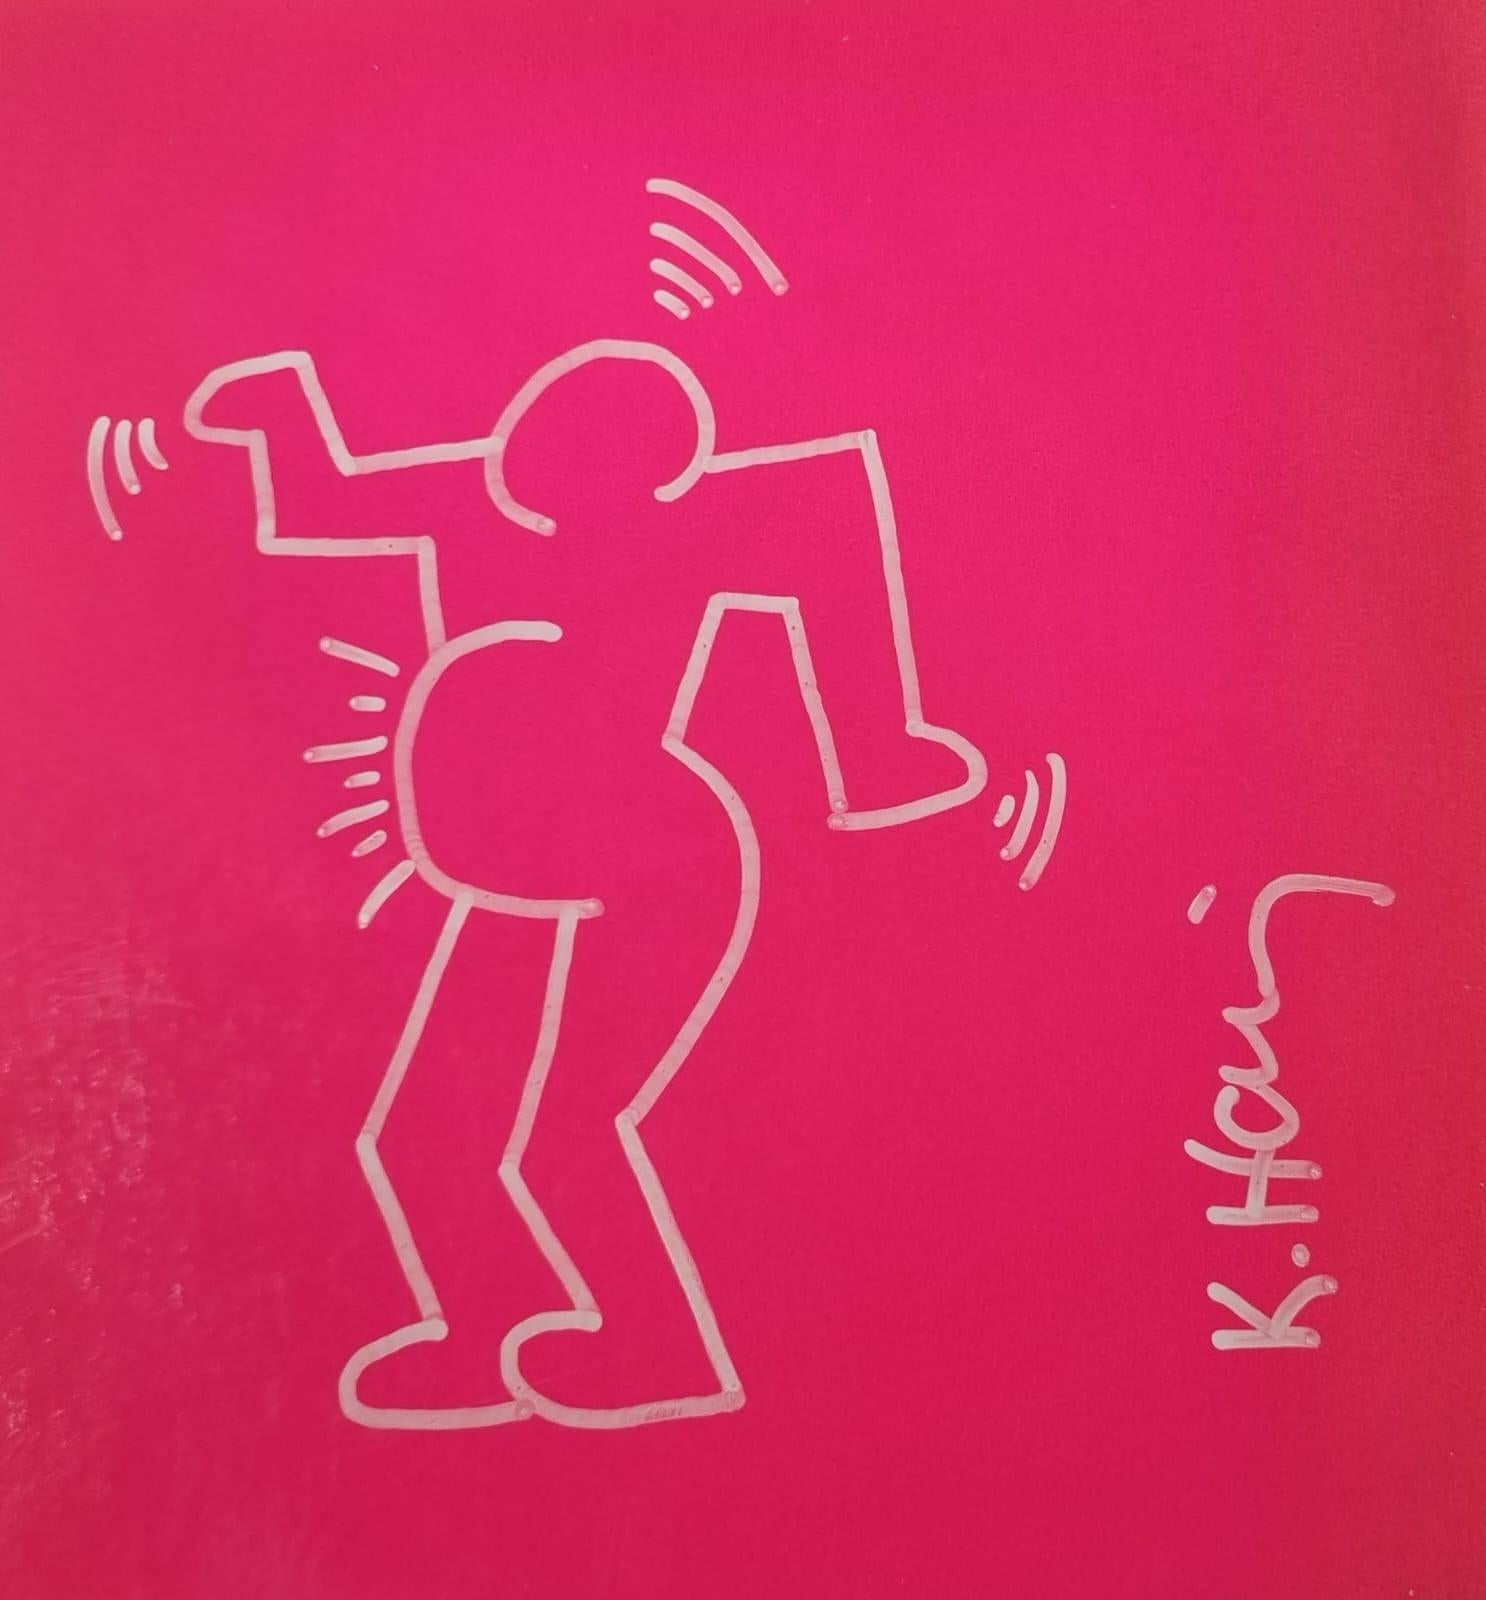 Signed artist catalog with a drawing - Mixed Media Art by Keith Haring